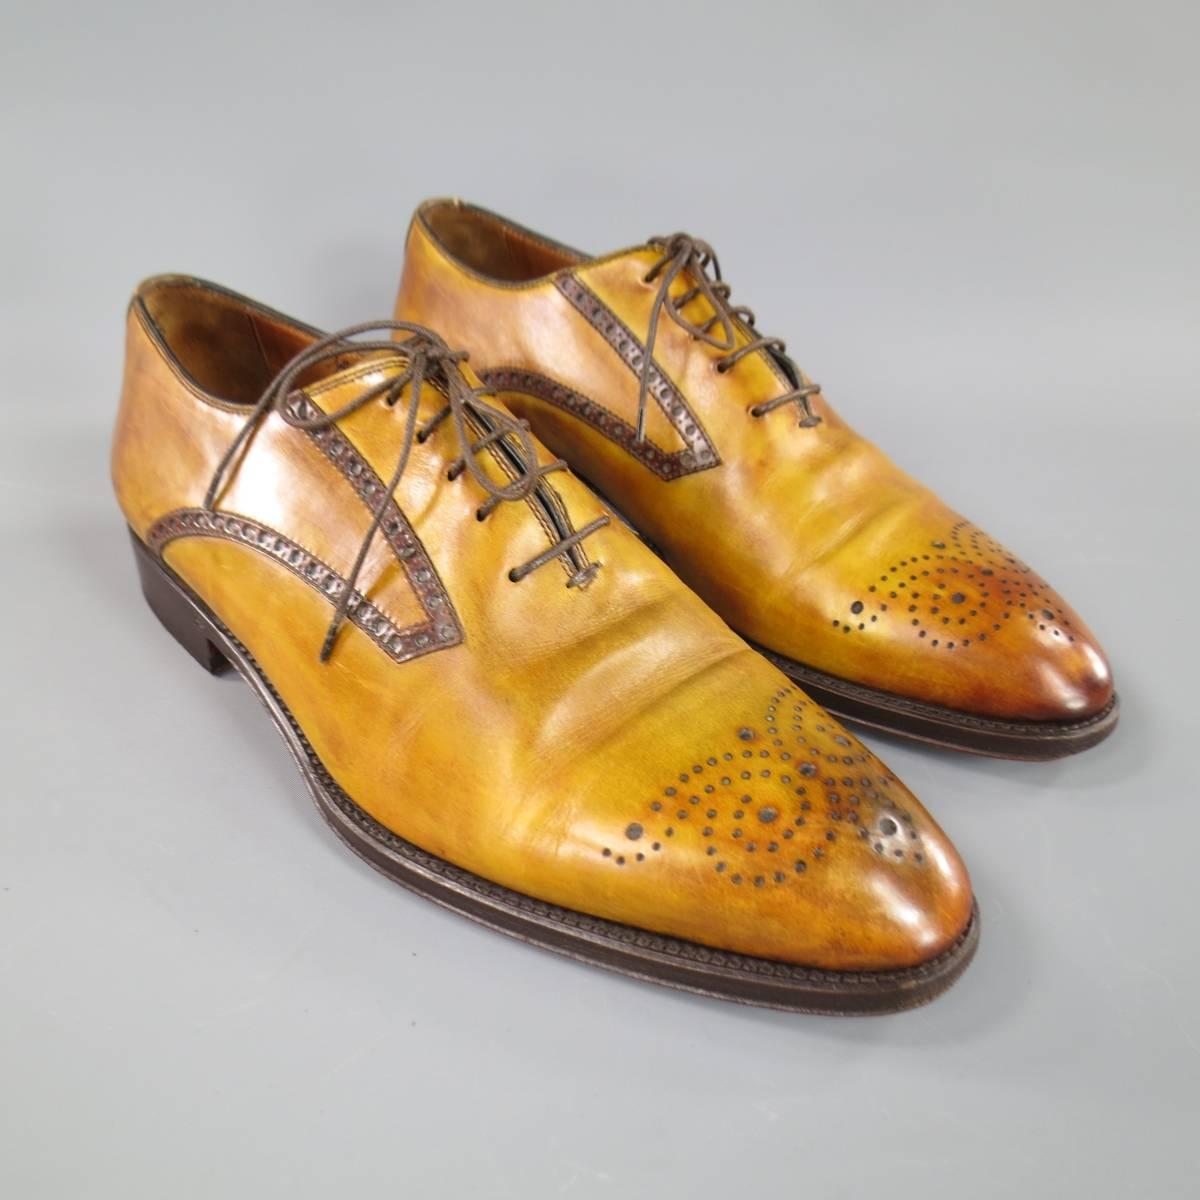 These BONTONI dress shoes come in multi tonal tan and brown washed effect leather featuring a pointed toe with brogue details. With Box. Made in Italy Retails at $1050.00.
 
Good Pre-Owned Condition.
Marked: 10
 
12.45 x 4.25 in.
